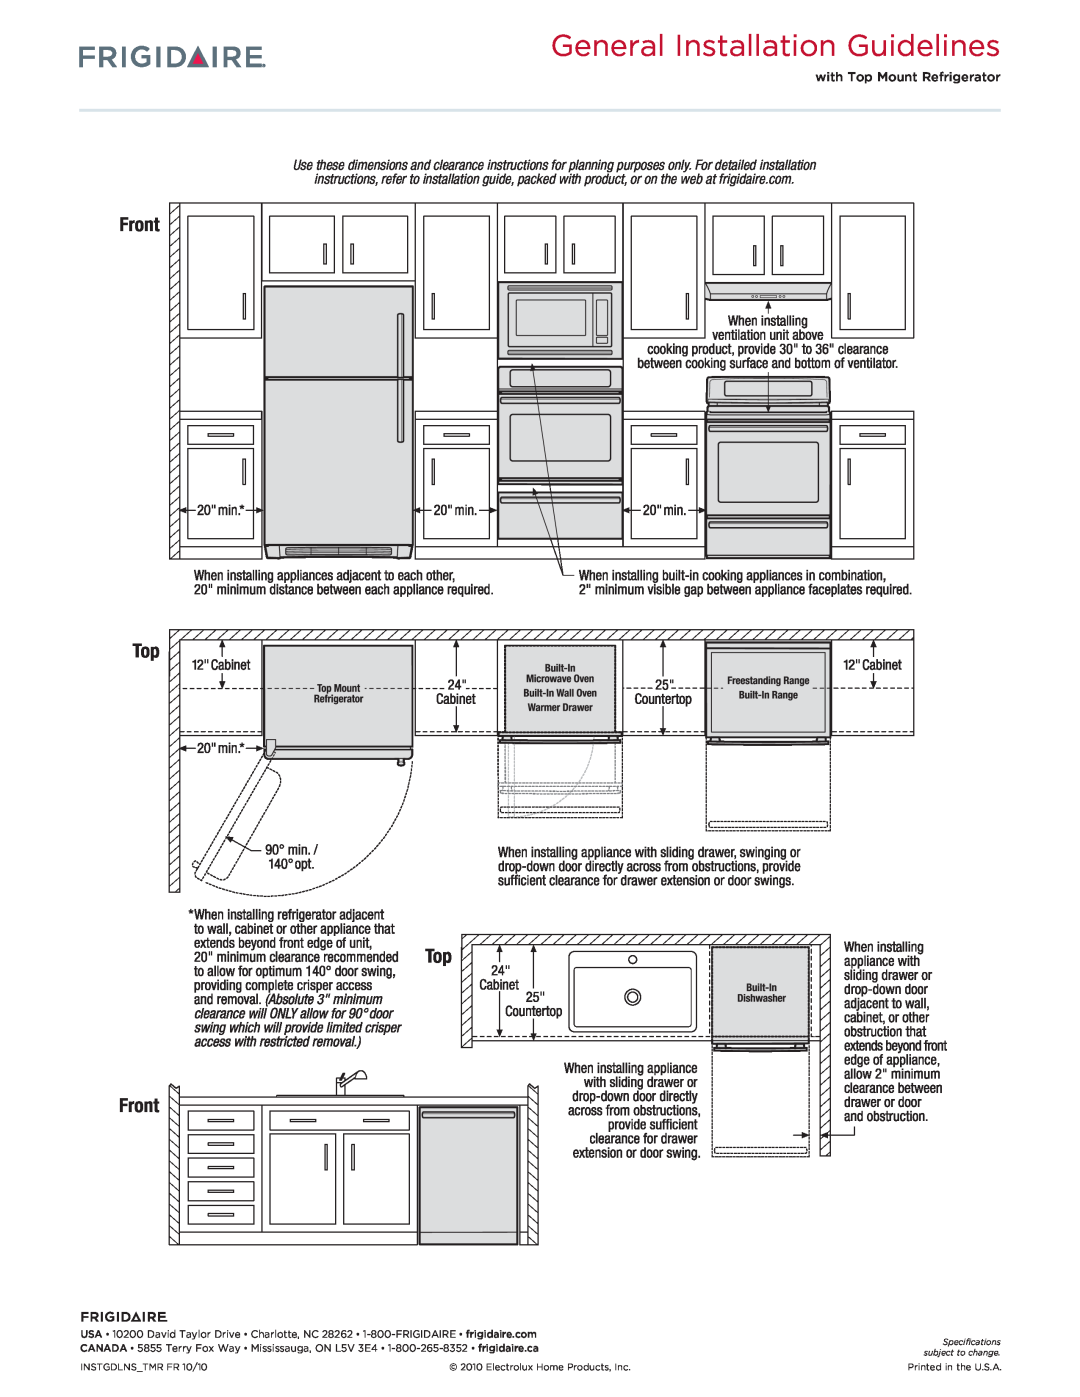 Frigidaire MWV150K W/B dimensions General Installation Guidelines, Top Front, with Top Mount Refrigerator 